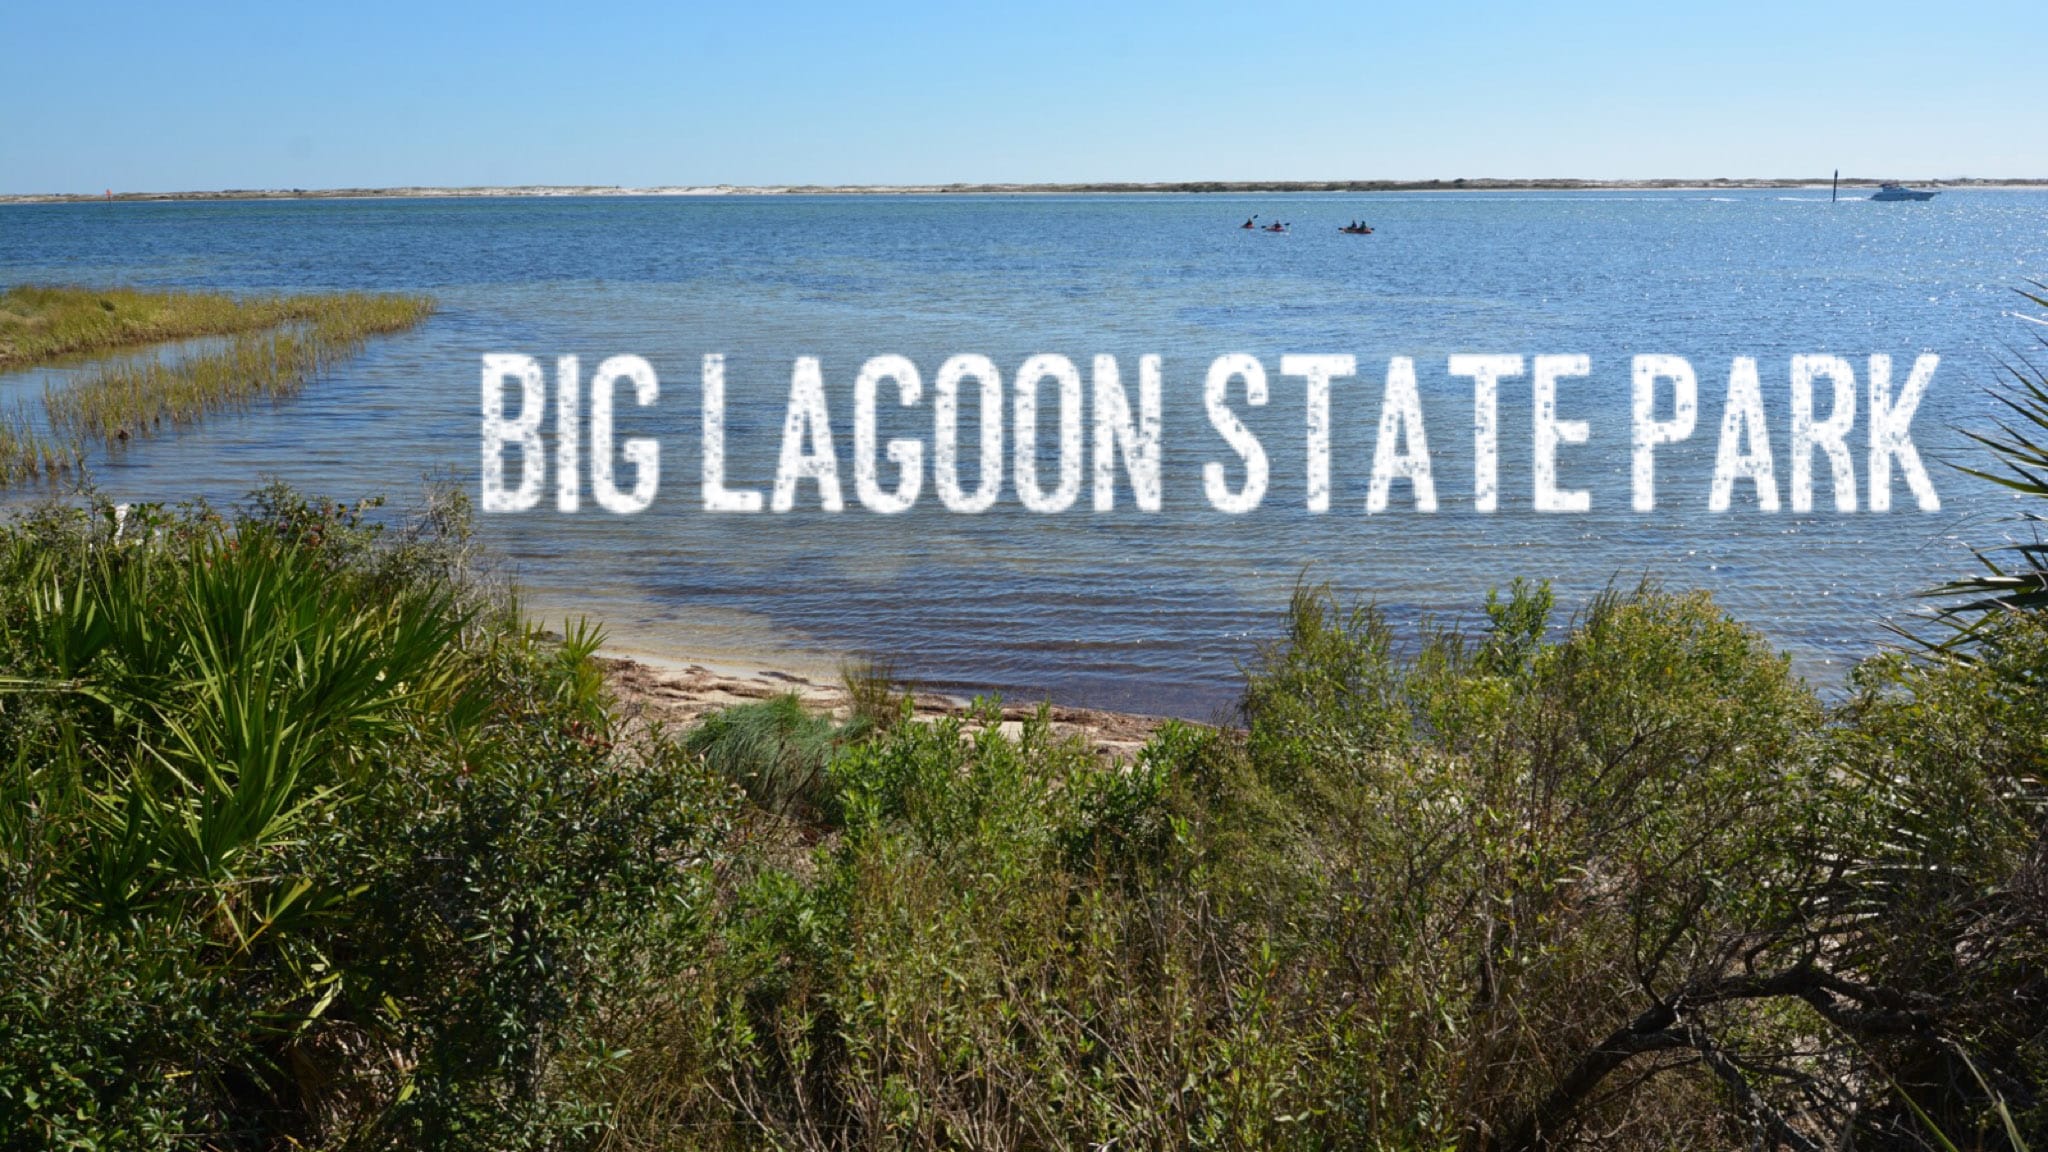 Plan Your Trip to the Grand Lagoon Region